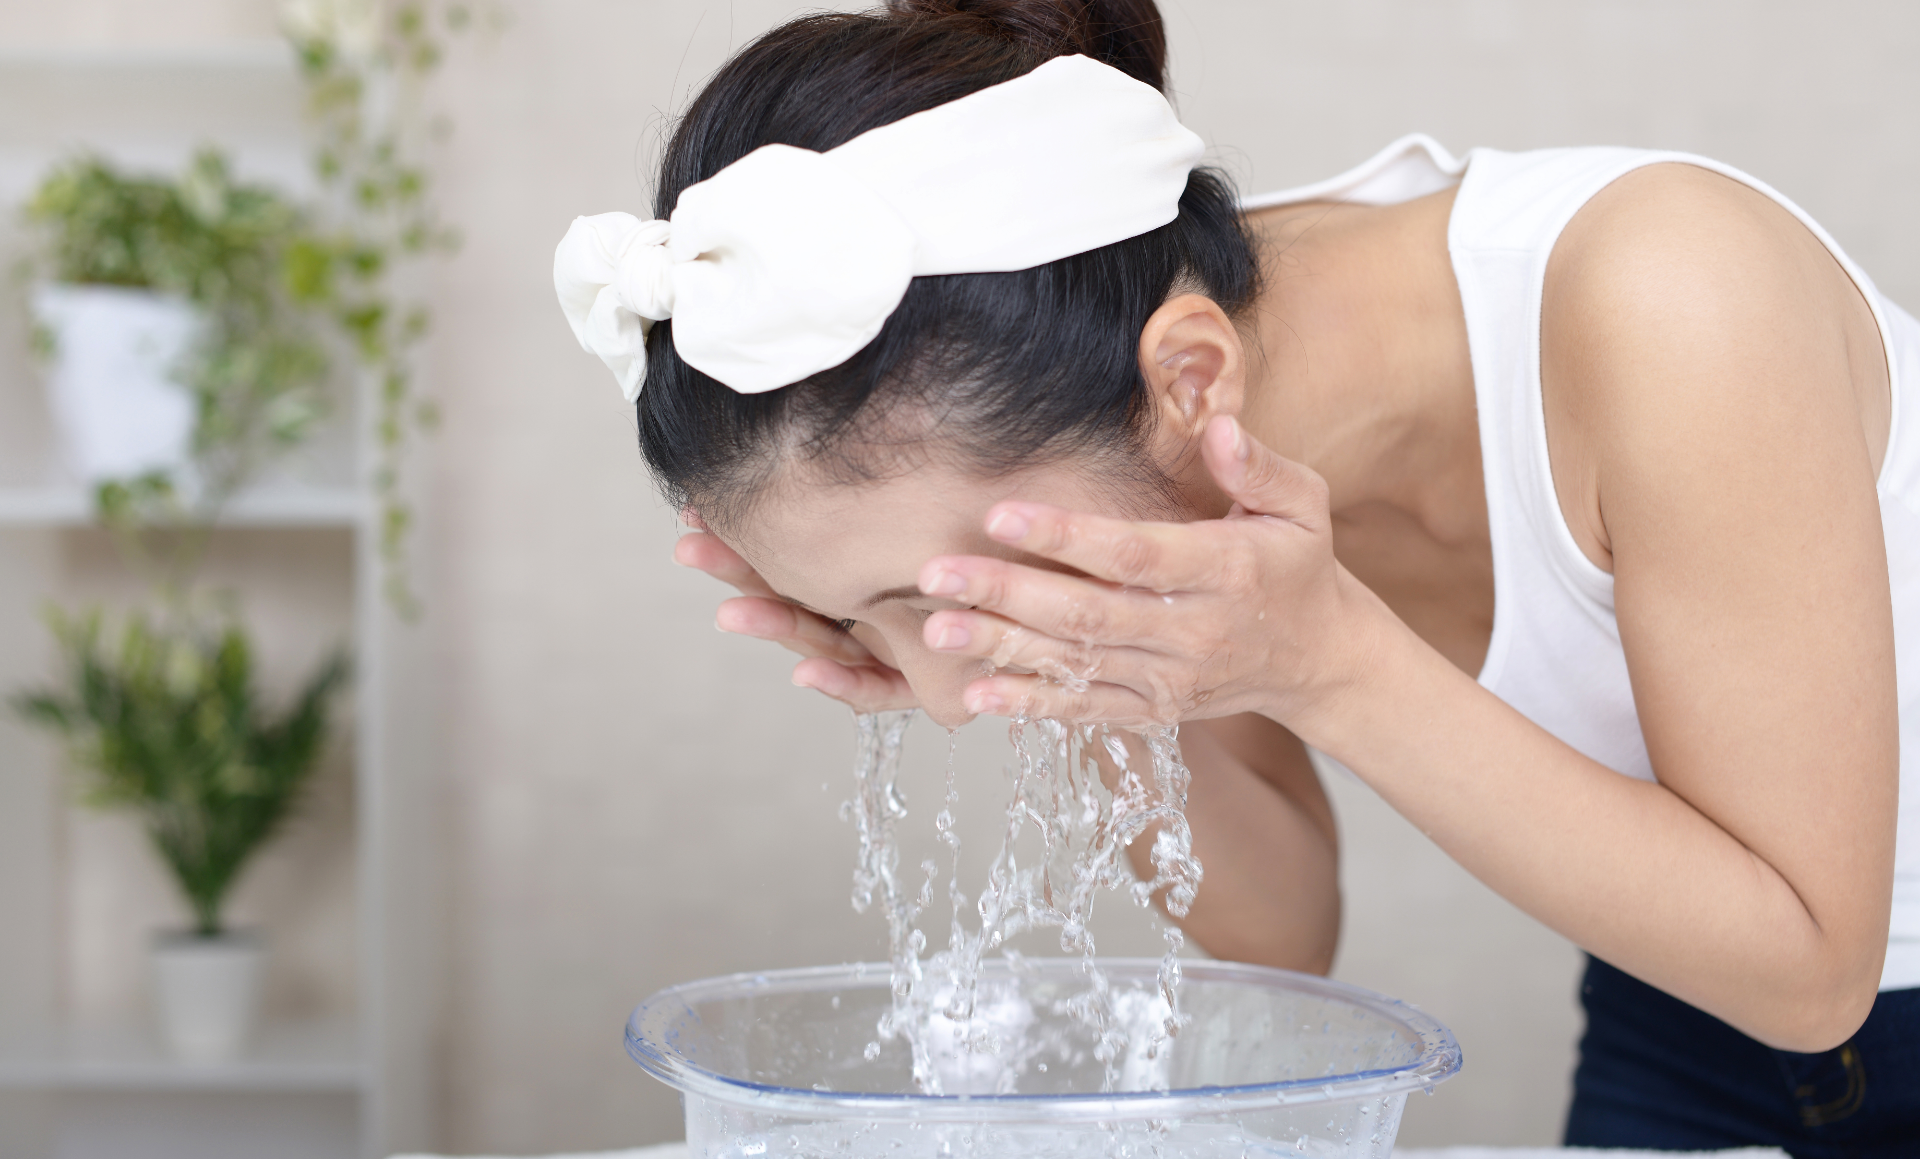 Woman washing her face in a glass sink, with her hair held back by a headband